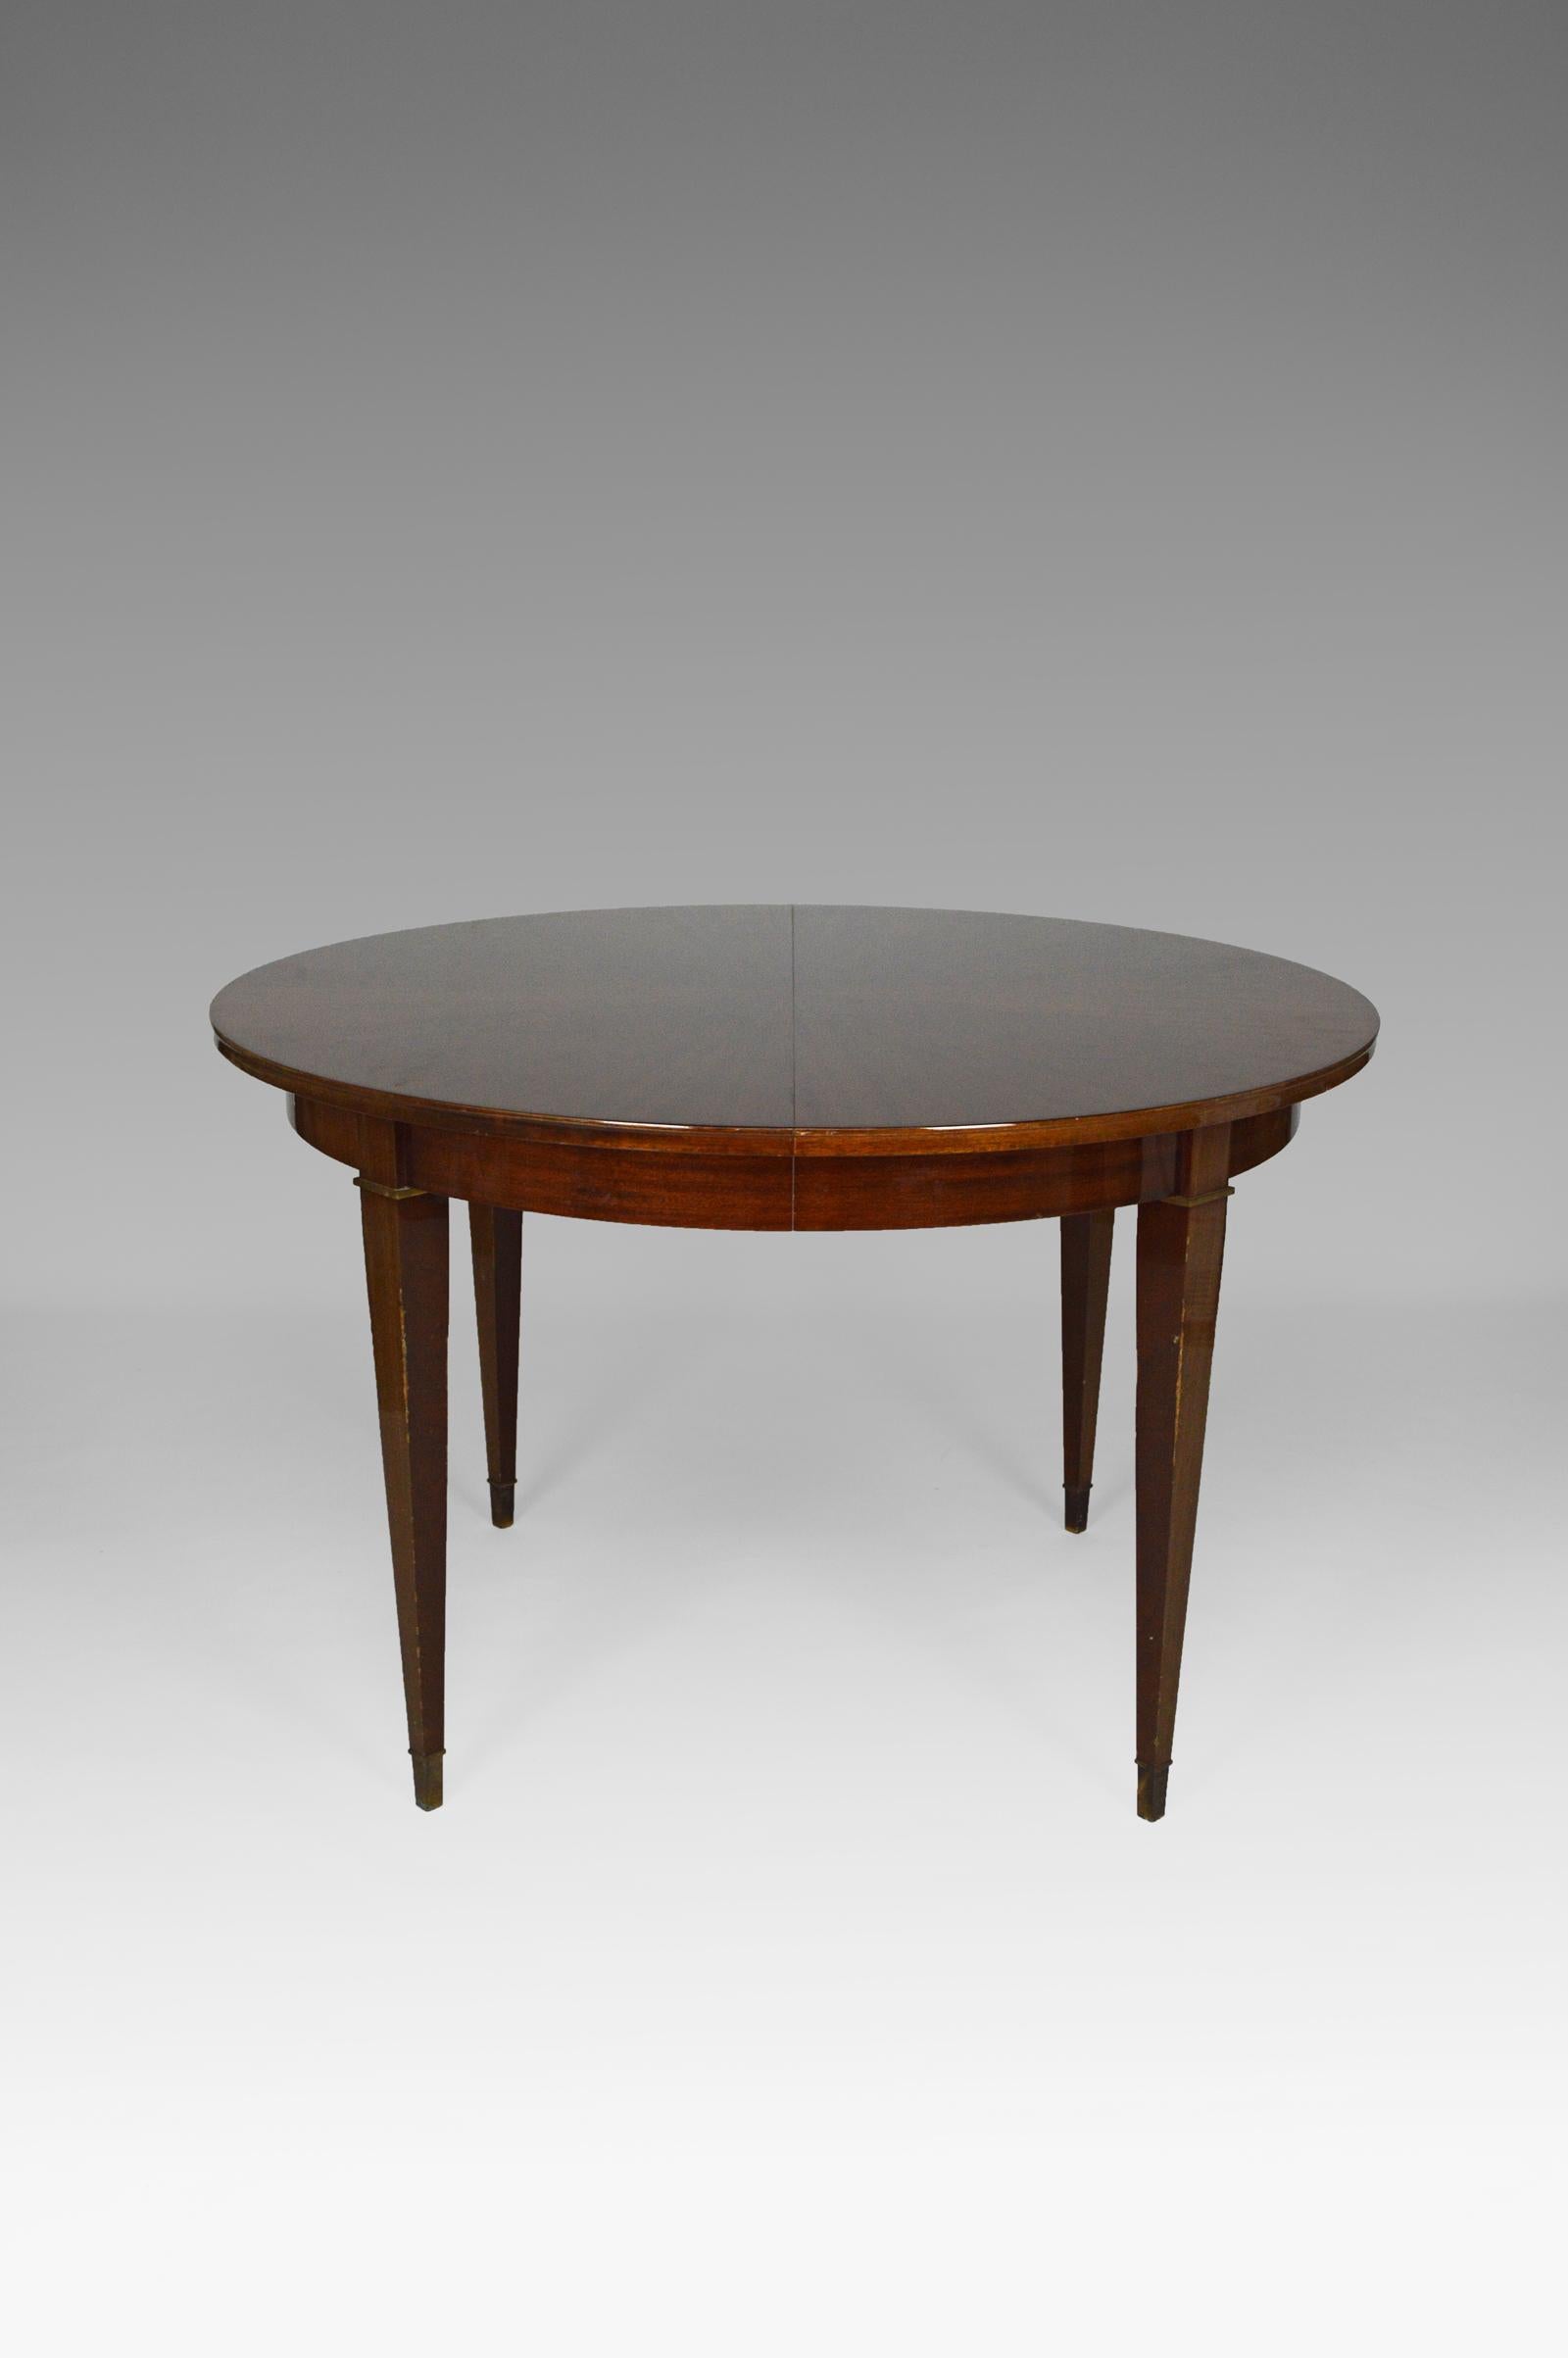 French Art Deco Extendable Round Table in Mahogany, by Jacques Adnet, circa 1940 For Sale